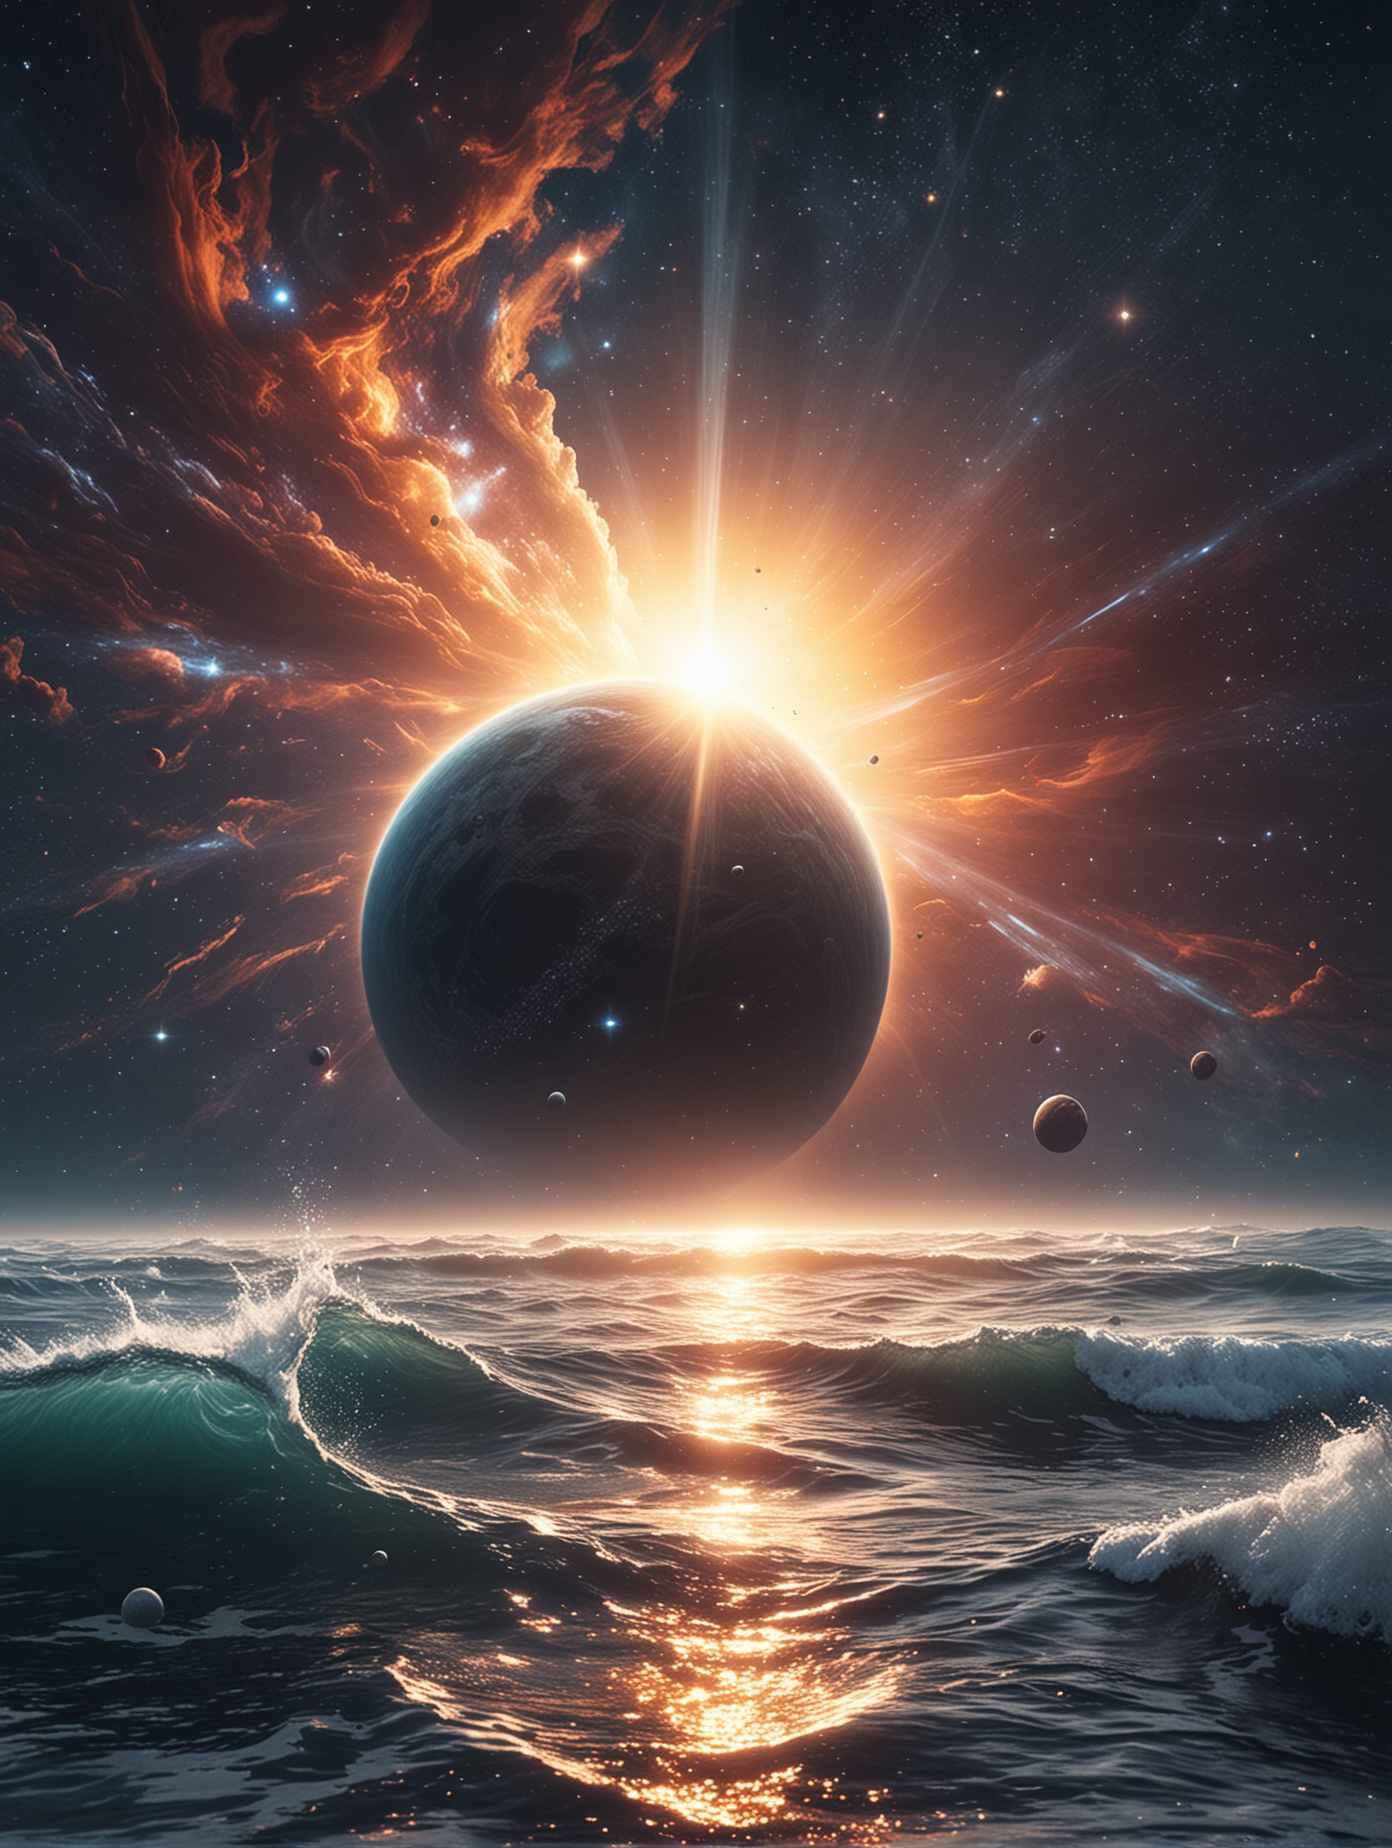  Create an image that shows outer space with a sunrise effect and water